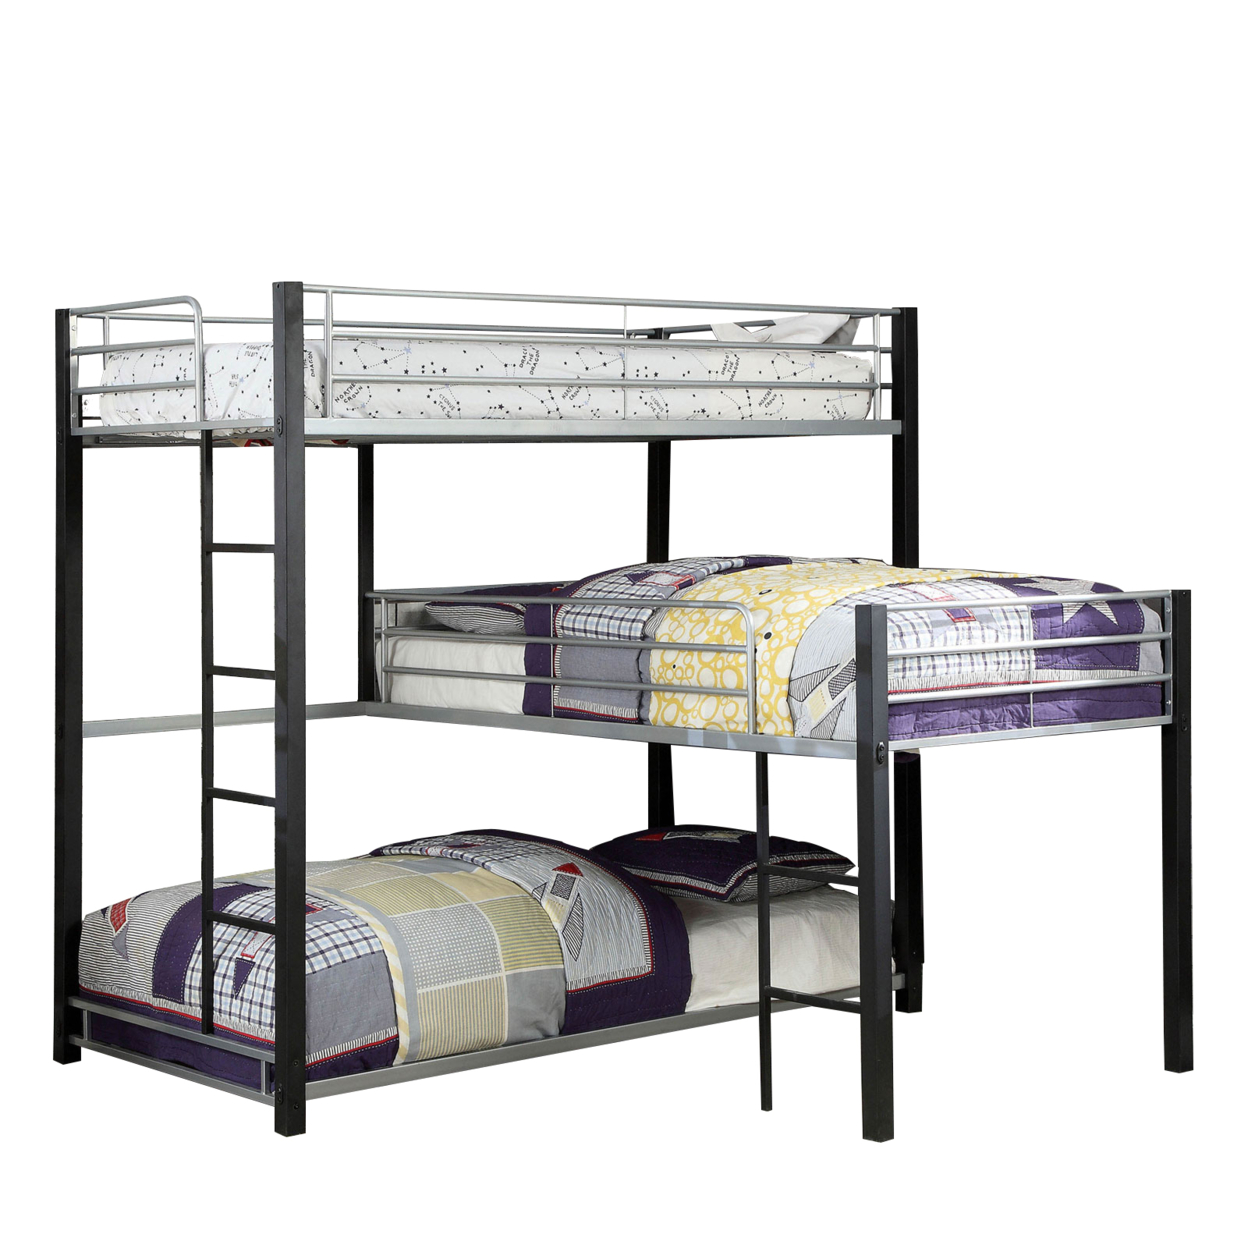 3 Tier Industrial Style Twin Bunk Bed With Corner Design, Black And Gray- Saltoro Sherpi